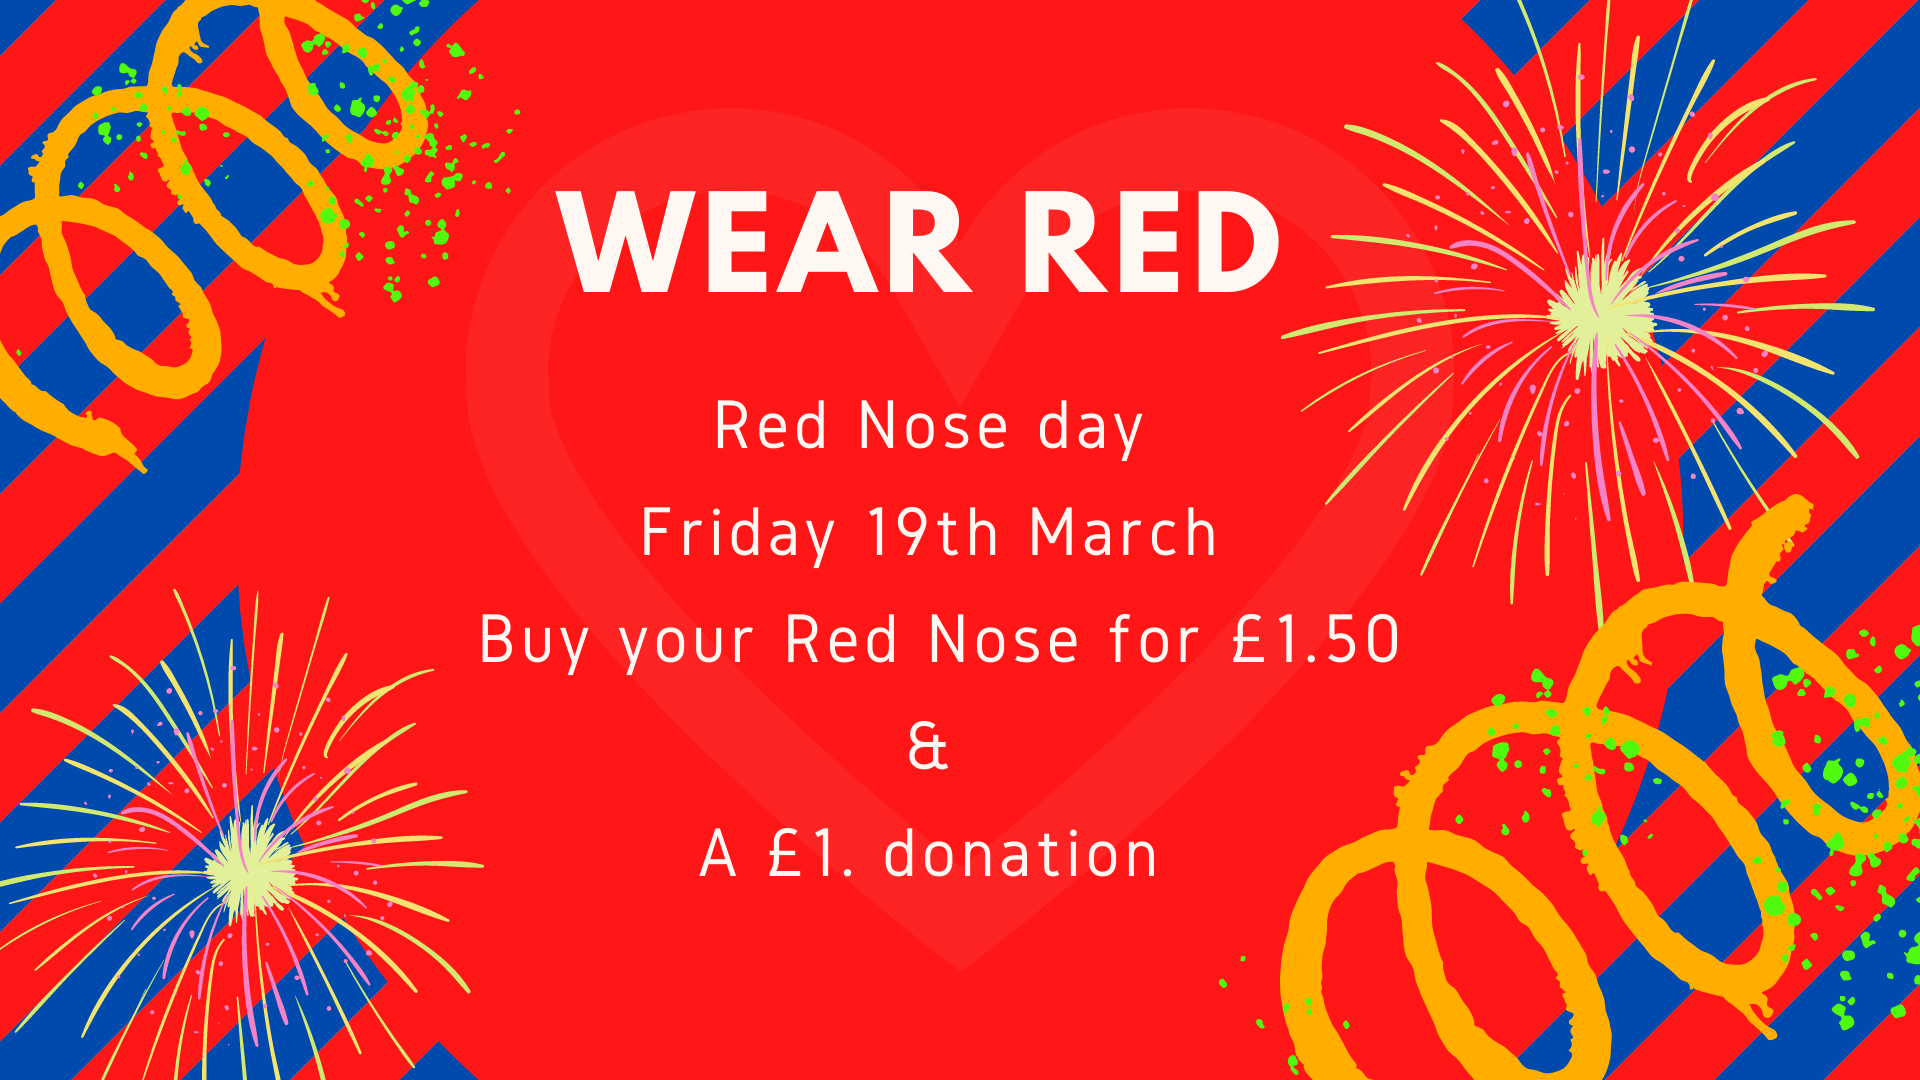 Red nose day poster